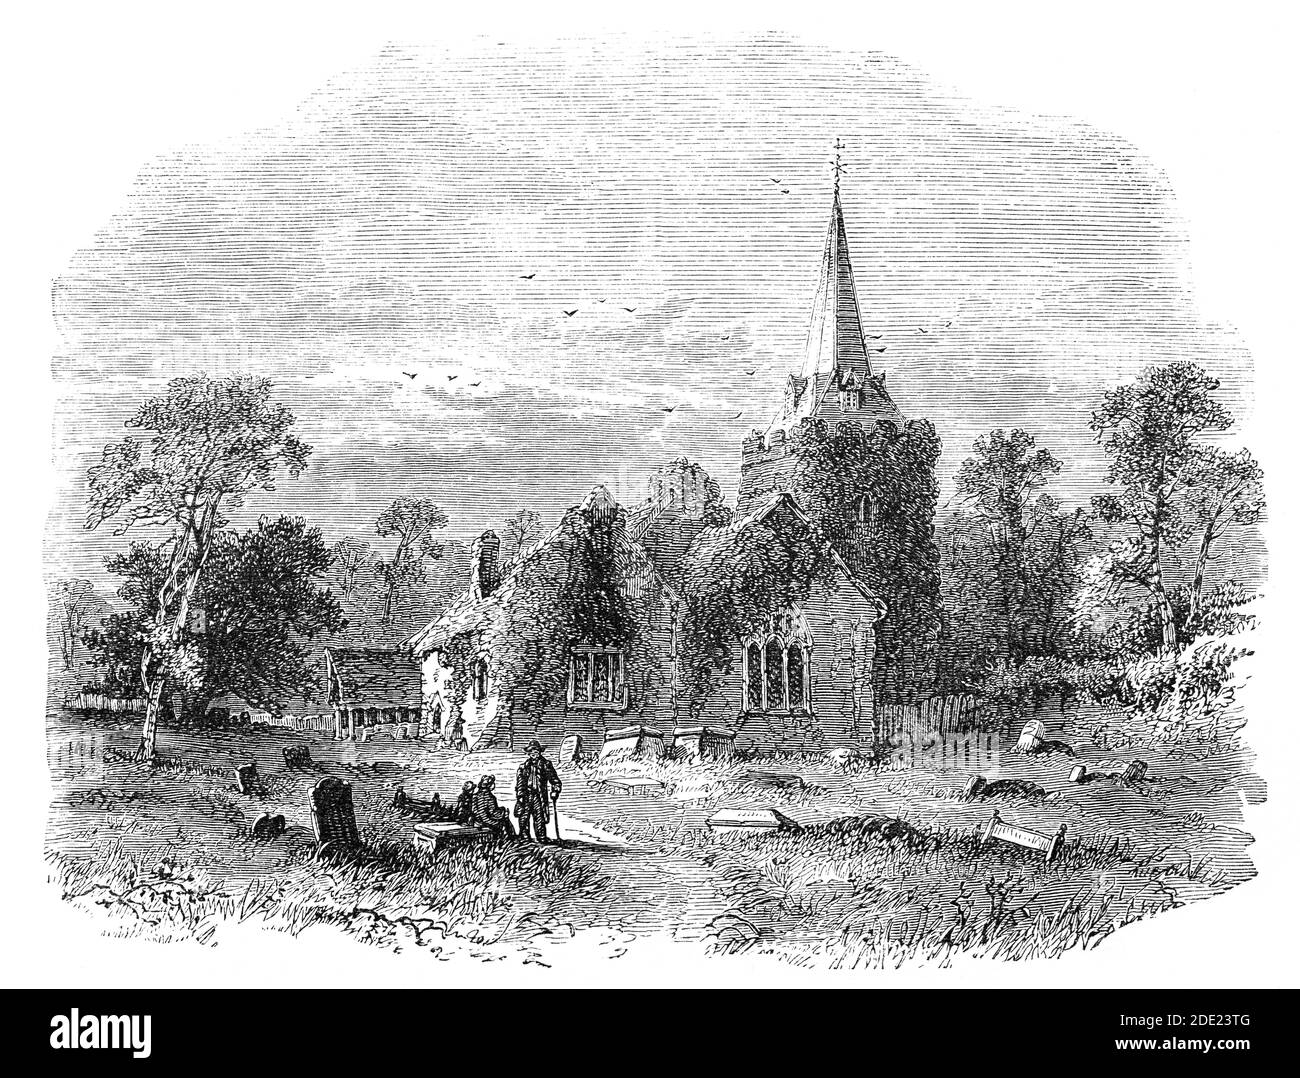 A 19th Century sketch of Stoke Poges Church aka Parish Church of Saint Giles, in the village of the same name in Buckinghamshire, England. The poem, 'Elegy Written in a Country Churchyard' by Thomas Gray (1716-1771), an English poet, letter-writer, classical scholar, and professor is believed to have been written in the churchyard. The poem was partly inspired by Gray's thoughts following the death of the poet Richard West in 1742 and published in 1751. Stock Photo